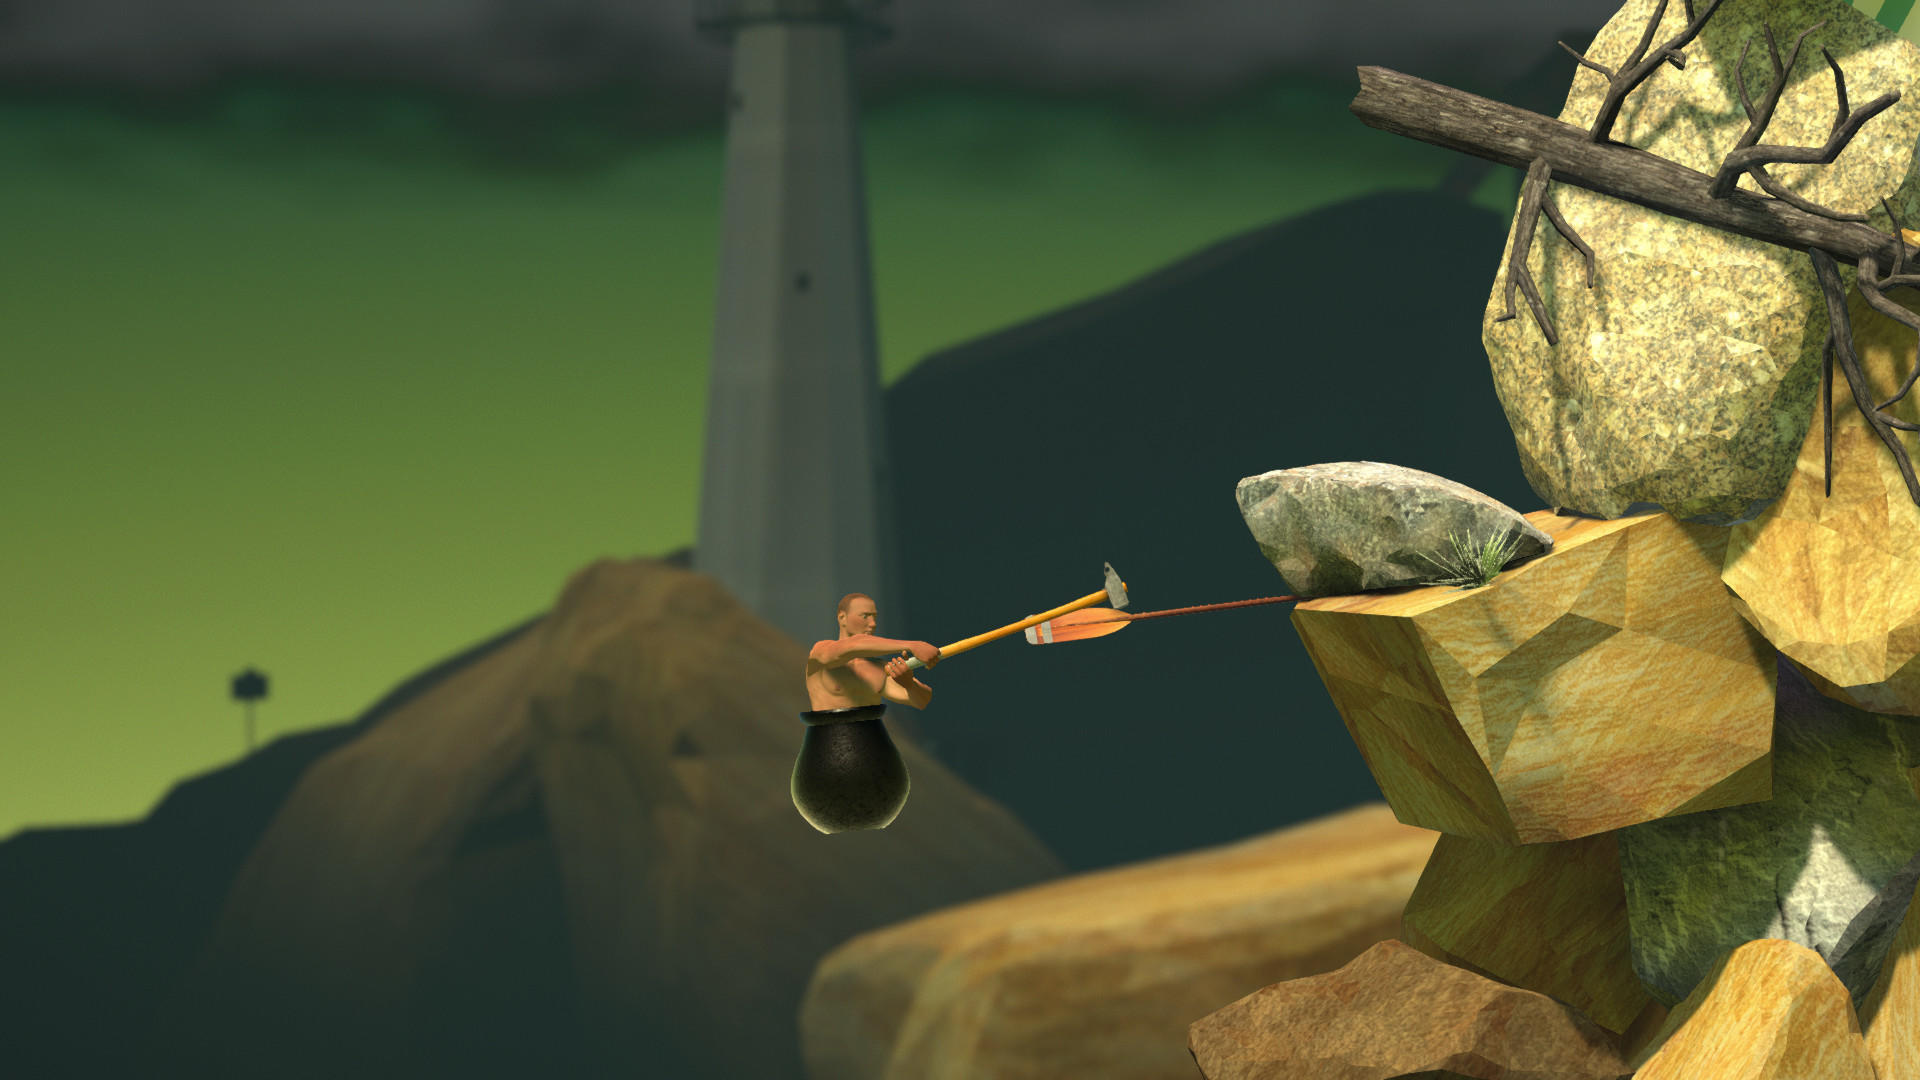 Getting Over It with Bennett Foddy screenshot game